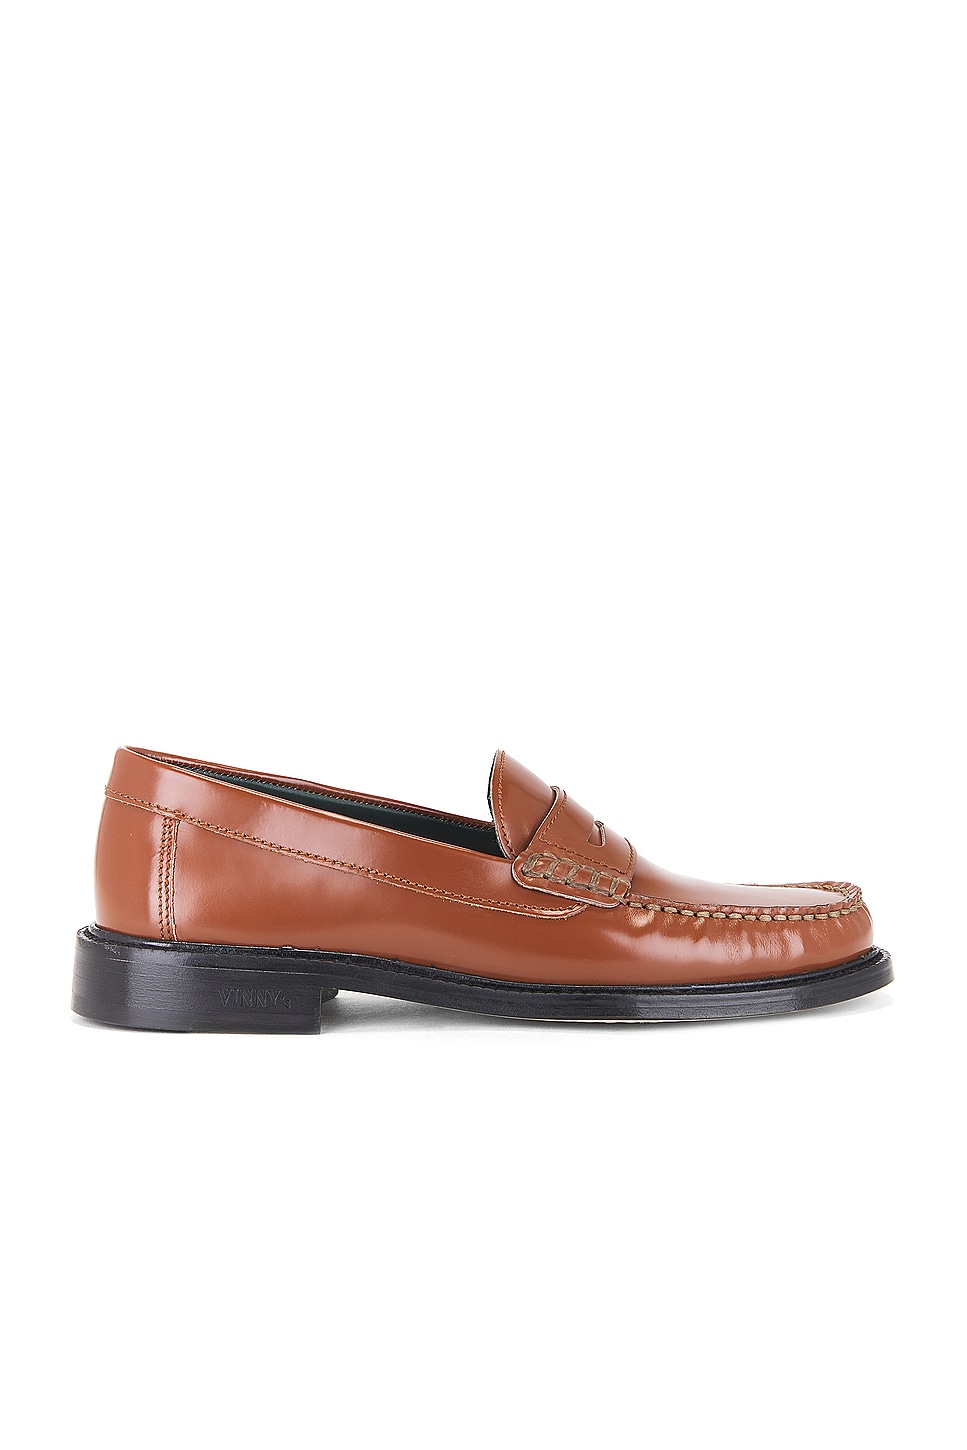 Image 1 of Vinny's Yardee Mocassin Loafer in Polido Leather Cognac